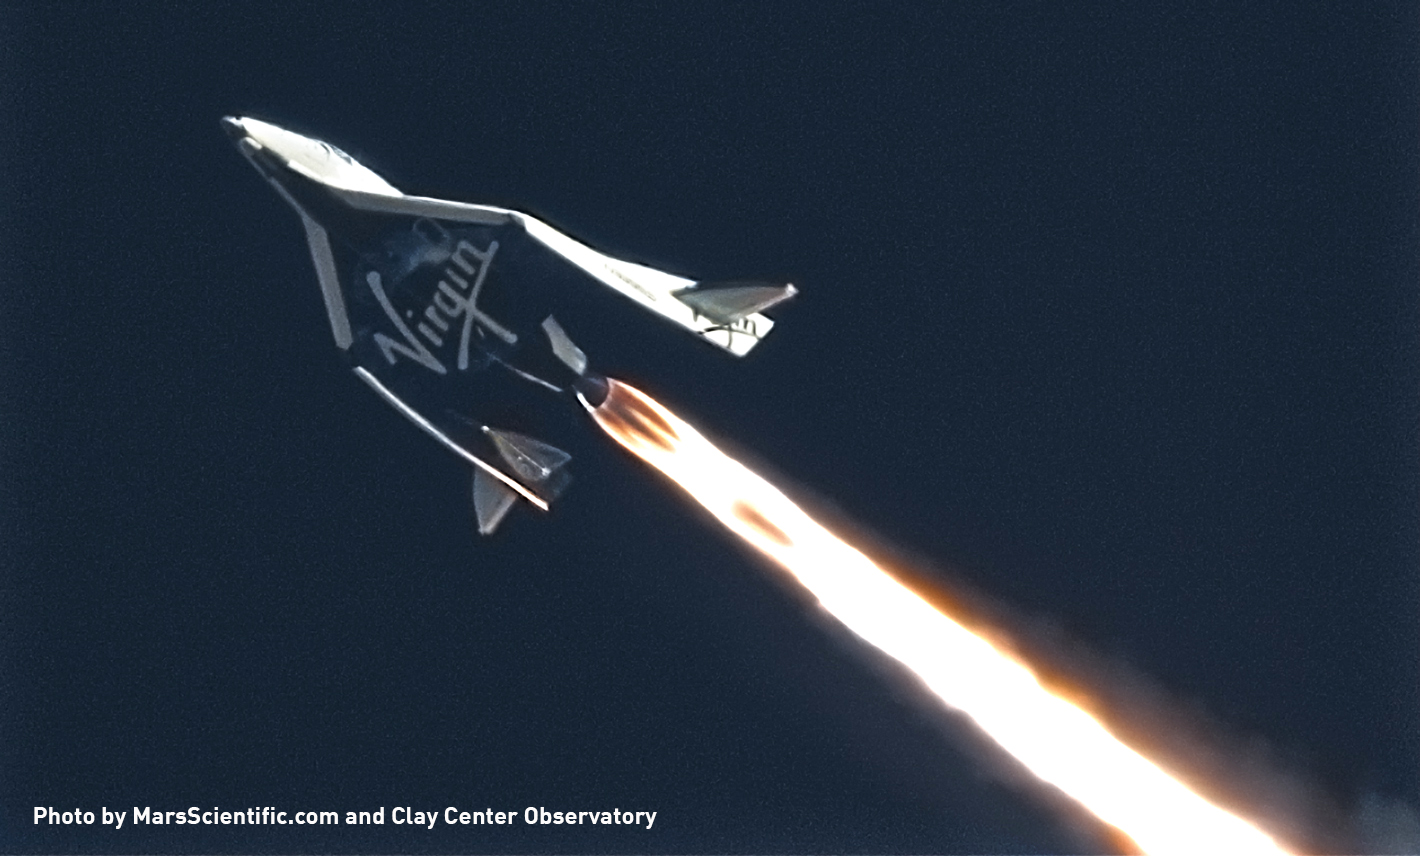 SpaceShipTwo Second Powered Flight PF03 January 10, 2014 (Copyright © 2014 MARS Scientific.All Rights Reserved. Used with permission.)